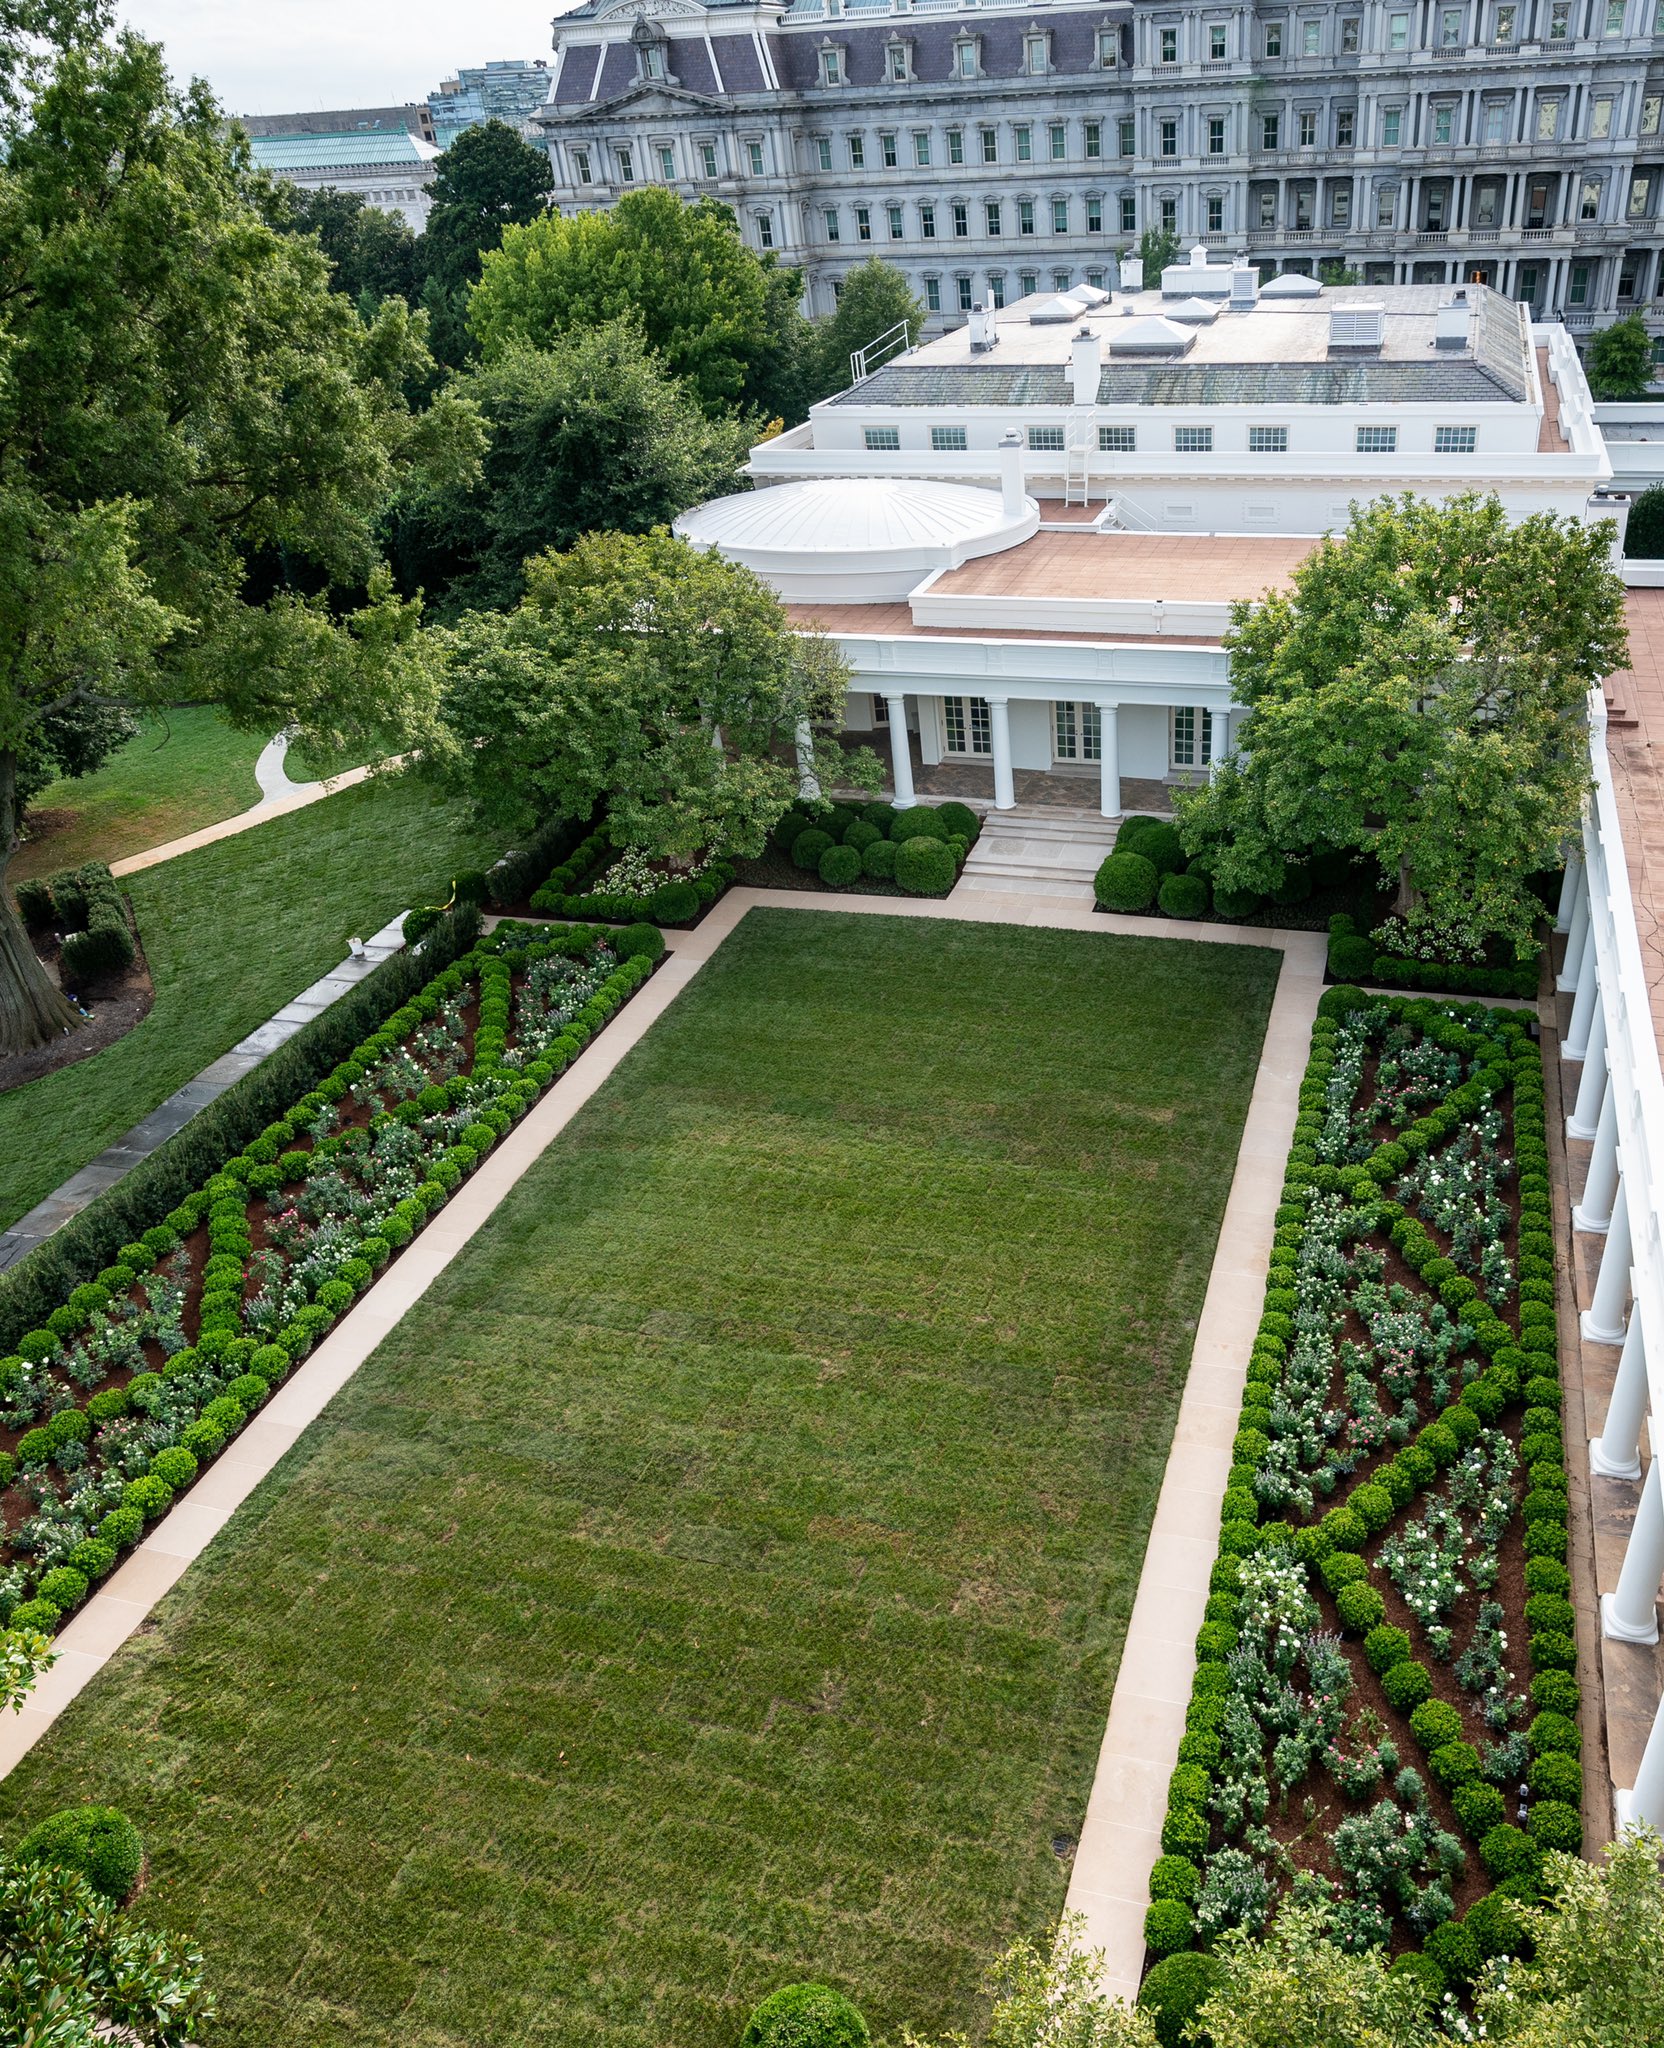 Here Are The Before And After Photos Of Melania Trump S White House Rose Garden Renovations Digg